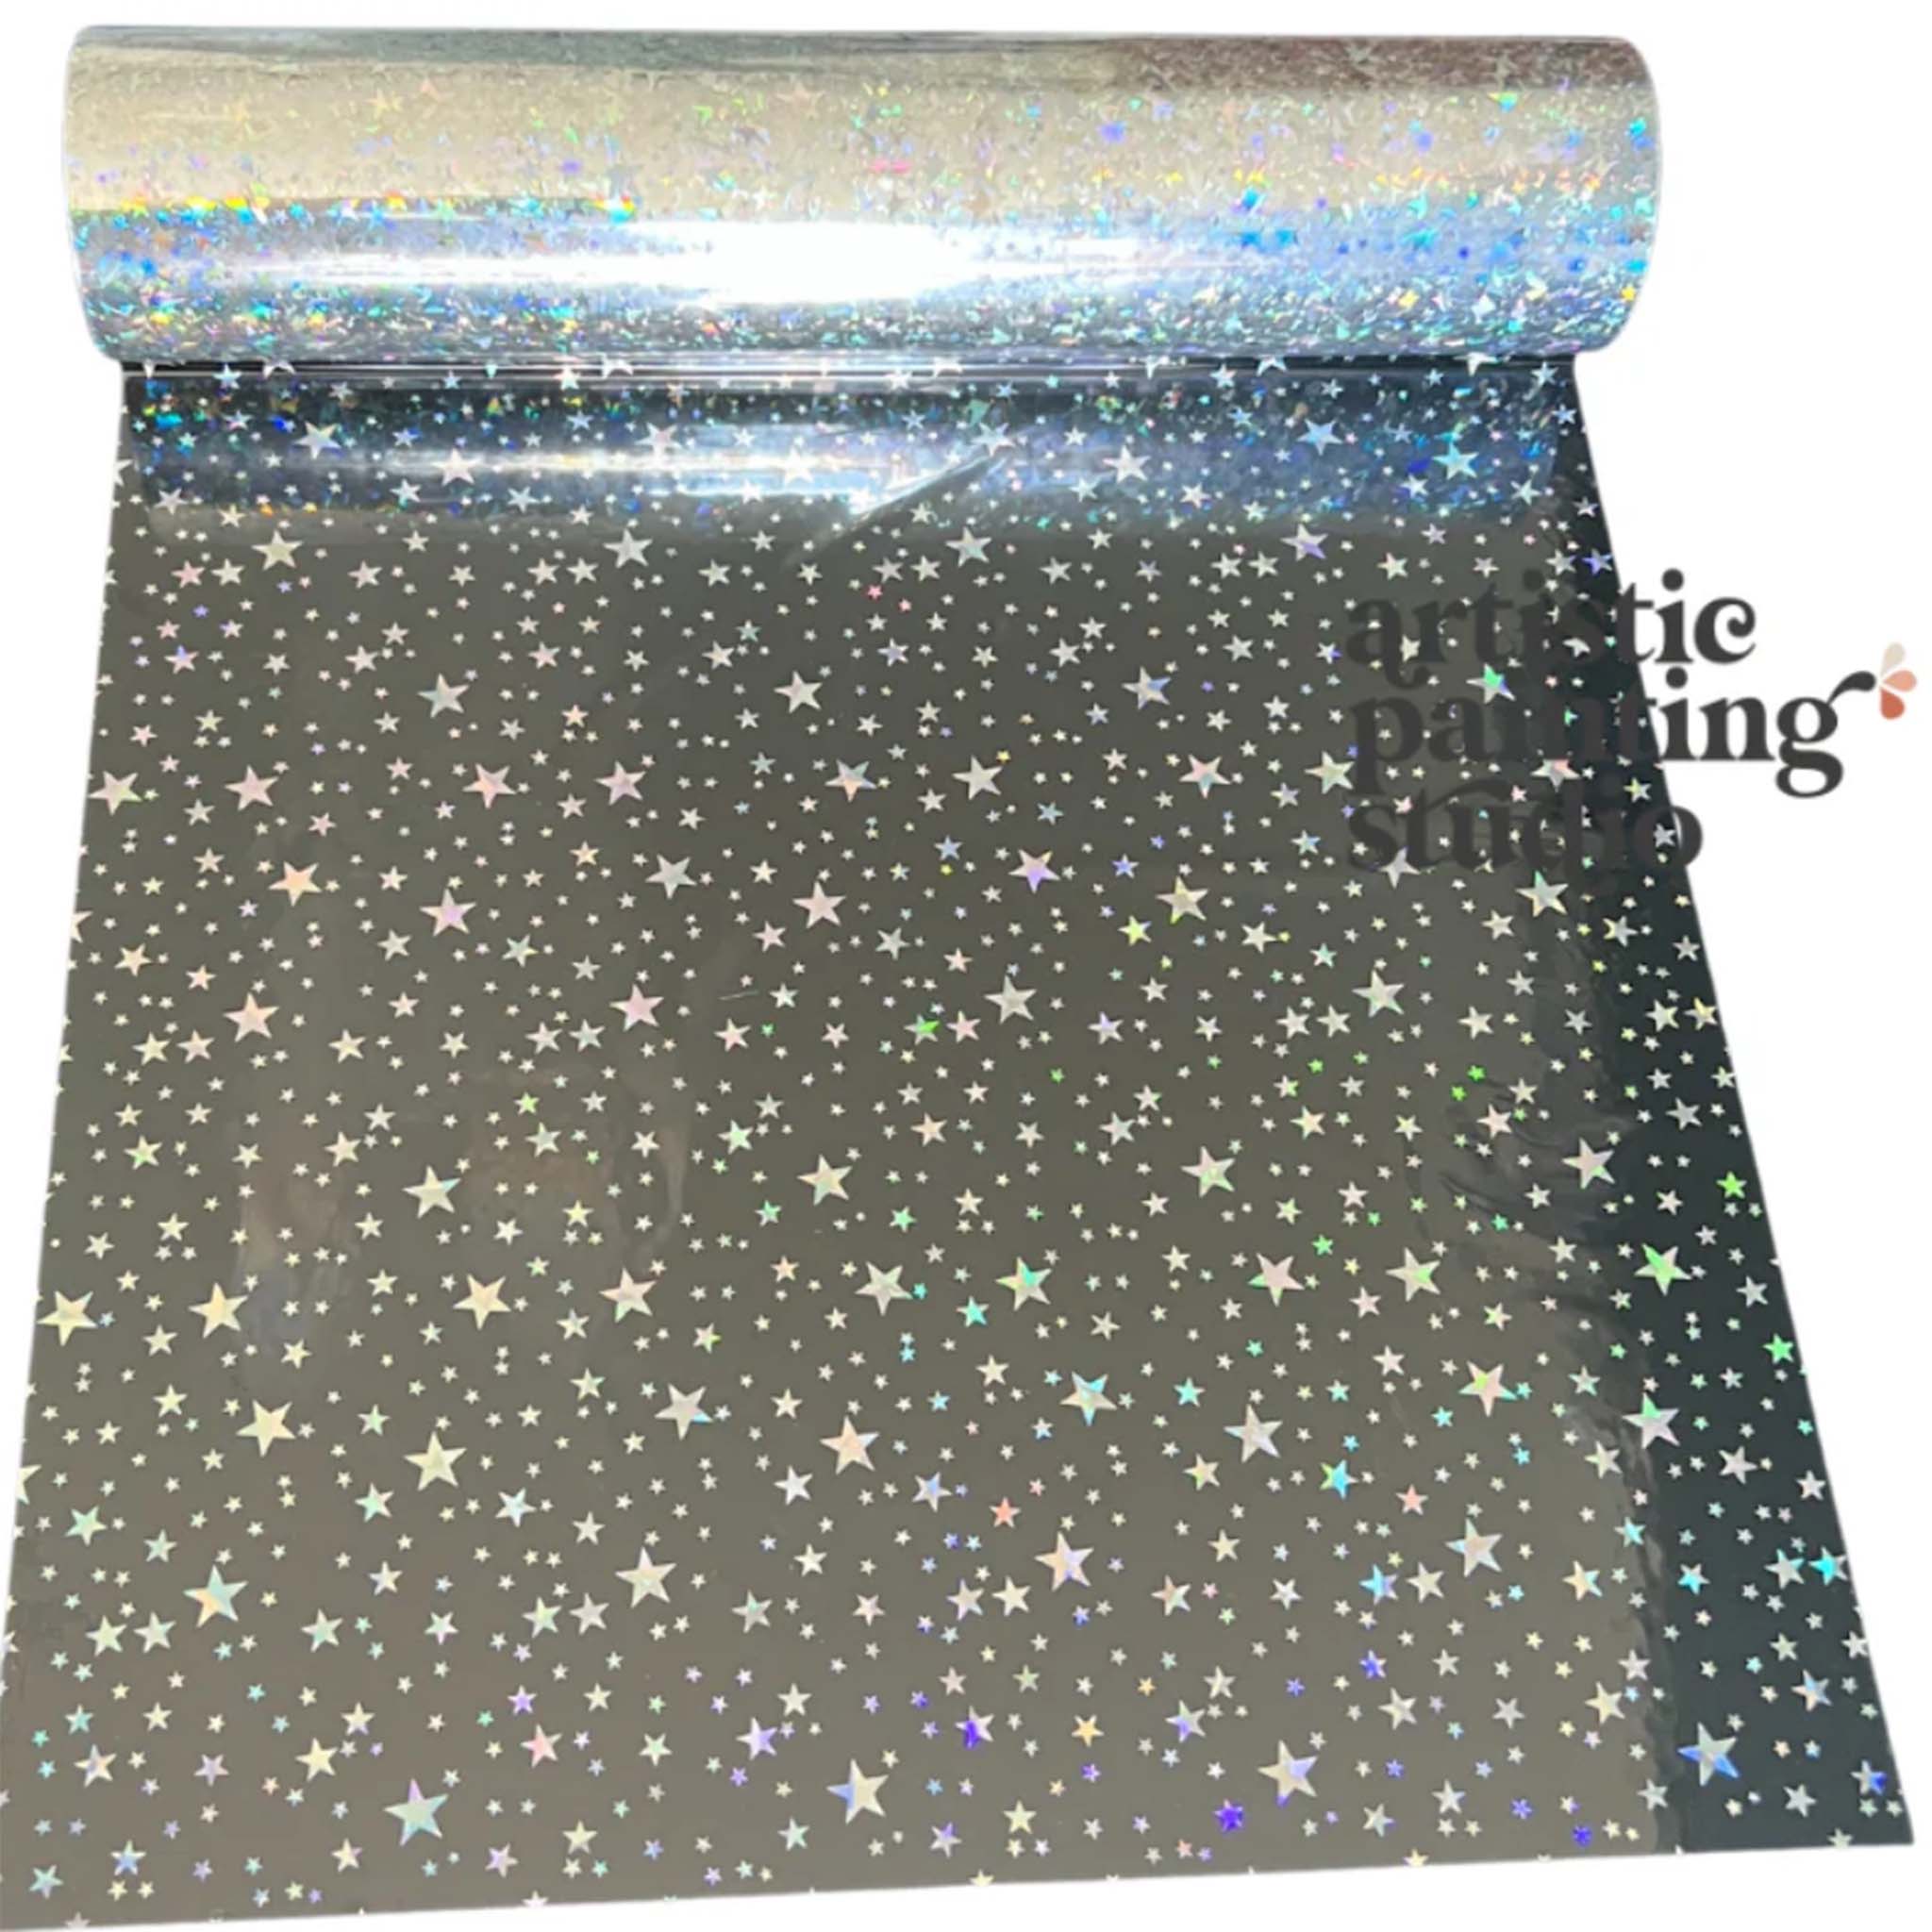 A roll of a silver holographic foil transfer that features an array of stars is against a white background.